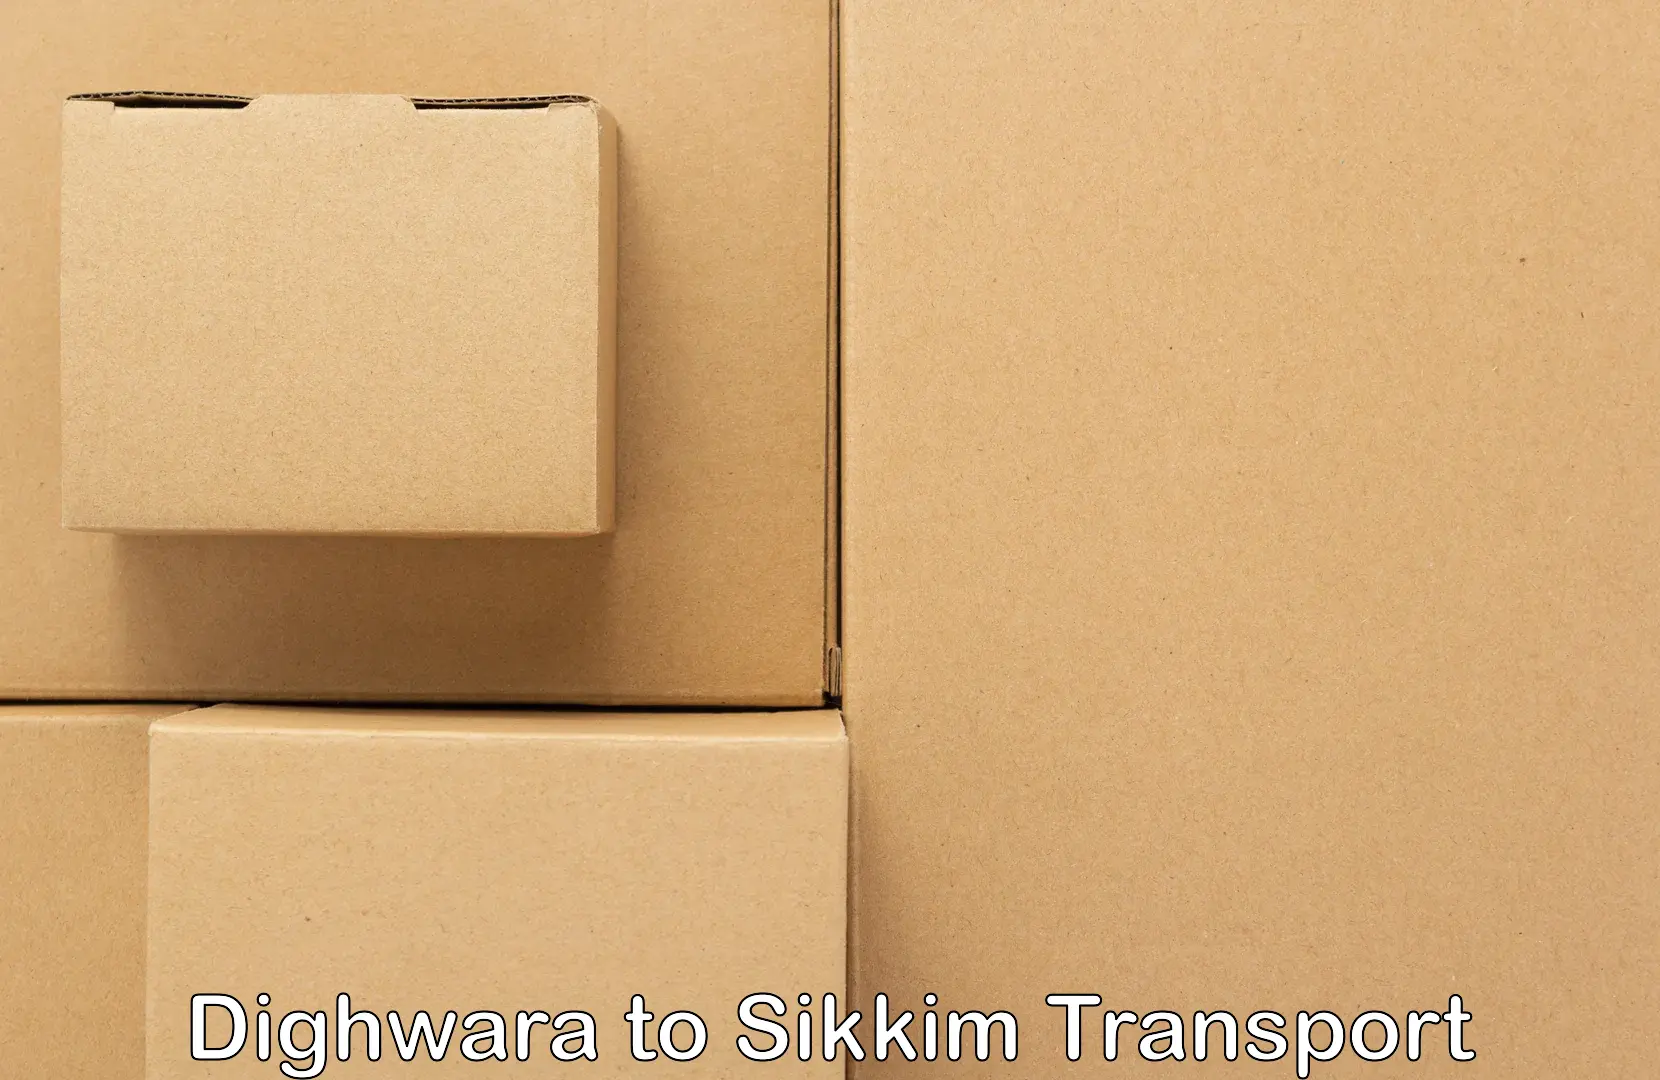 Container transport service Dighwara to Sikkim